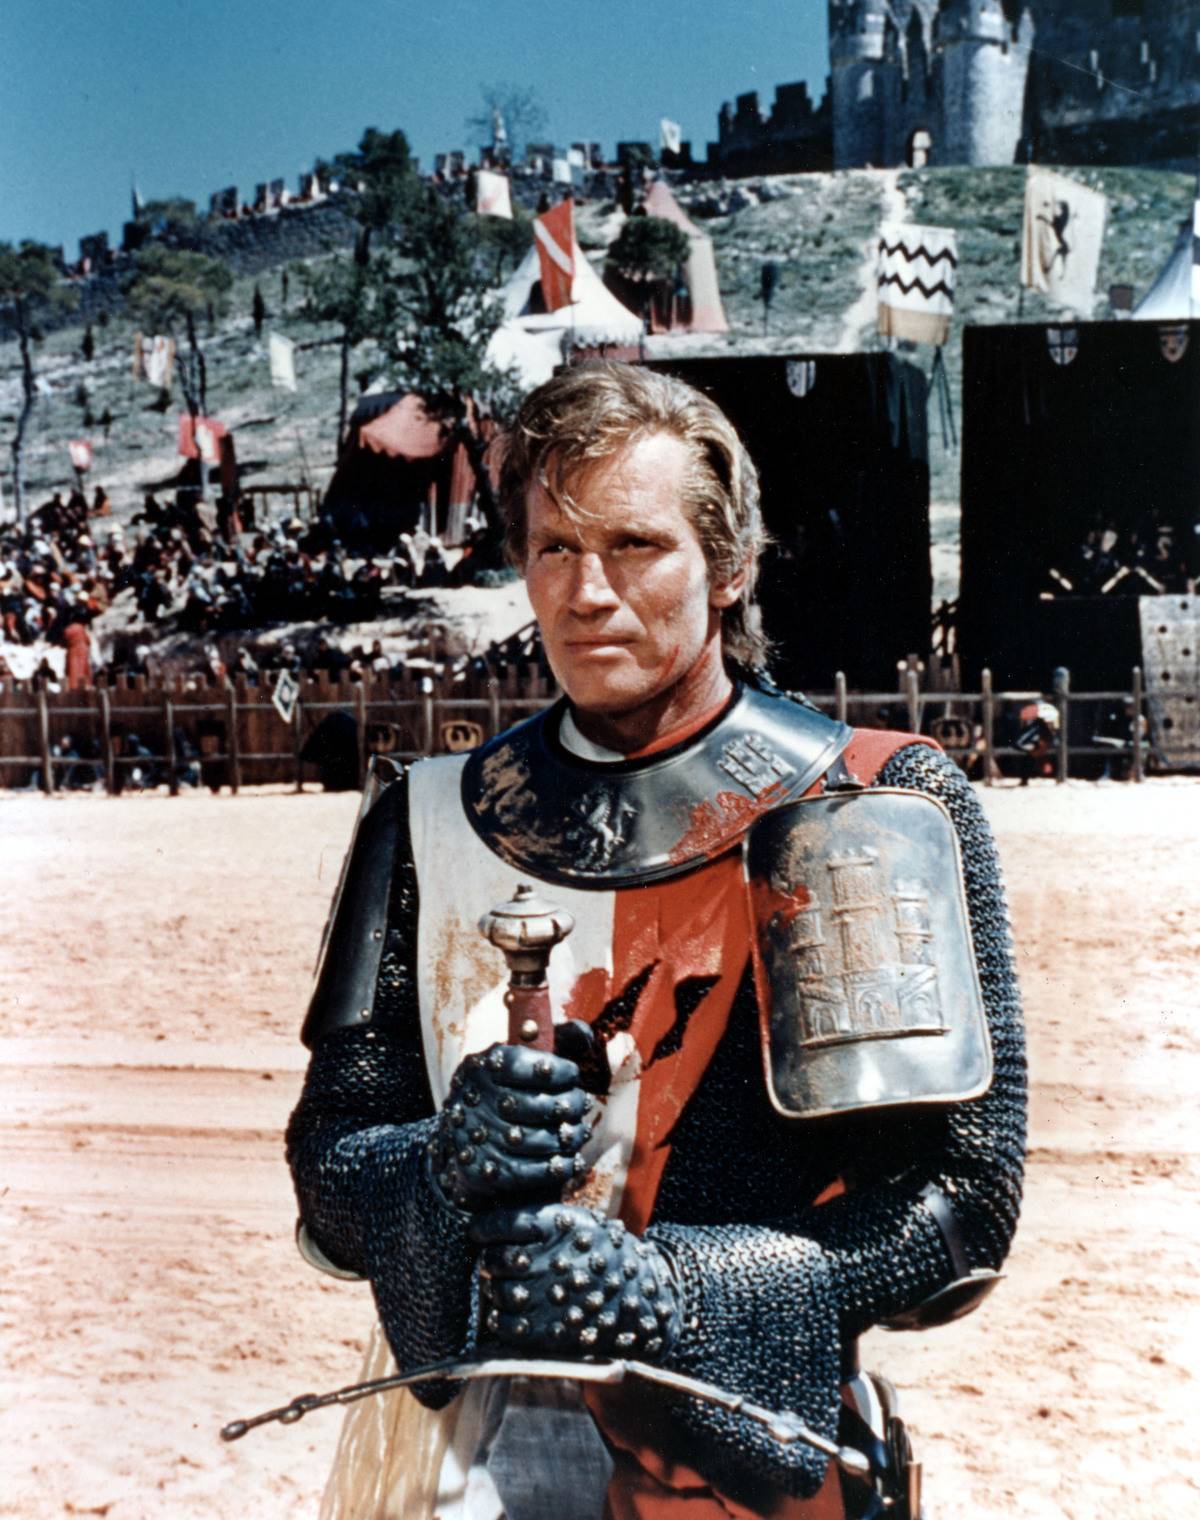 <p>In the movie <i>El Cid</i>, a tremendous amount of detail went into the medieval-style costume design by director Anthony Mann. With a staff of 400 seamstresses for wardrobe, Mann dedicated $500,000 to a local company to produce clothes resembling the Middle Ages. </p> <p>The film features 3,000 war helmets, 7,000 swords, 40,000 arrows, 5,780 shields, 1,253 medieval harnesses, 800 maces and daggers, and 650 chain mail suits for armor. </p>